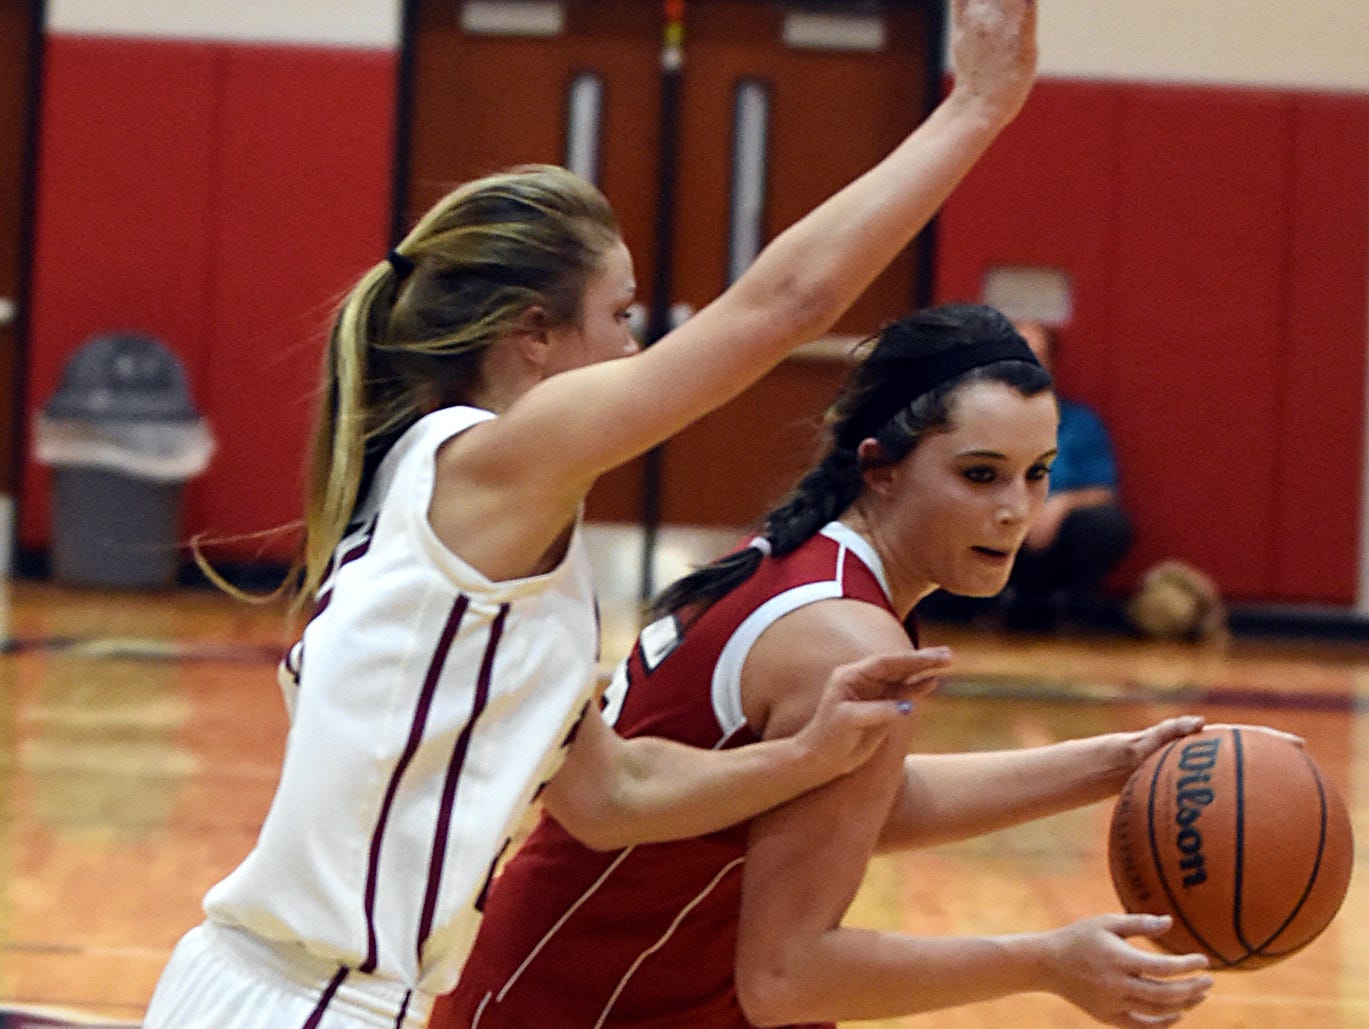 Westmoreland High junior forward Kaitlyn Norman dribbles into the lane as Cheatham County junior Josie Bumpus defends. Norman scored a game-high 19 points in the Lady Eagles' 51-46 loss on Saturday evening.